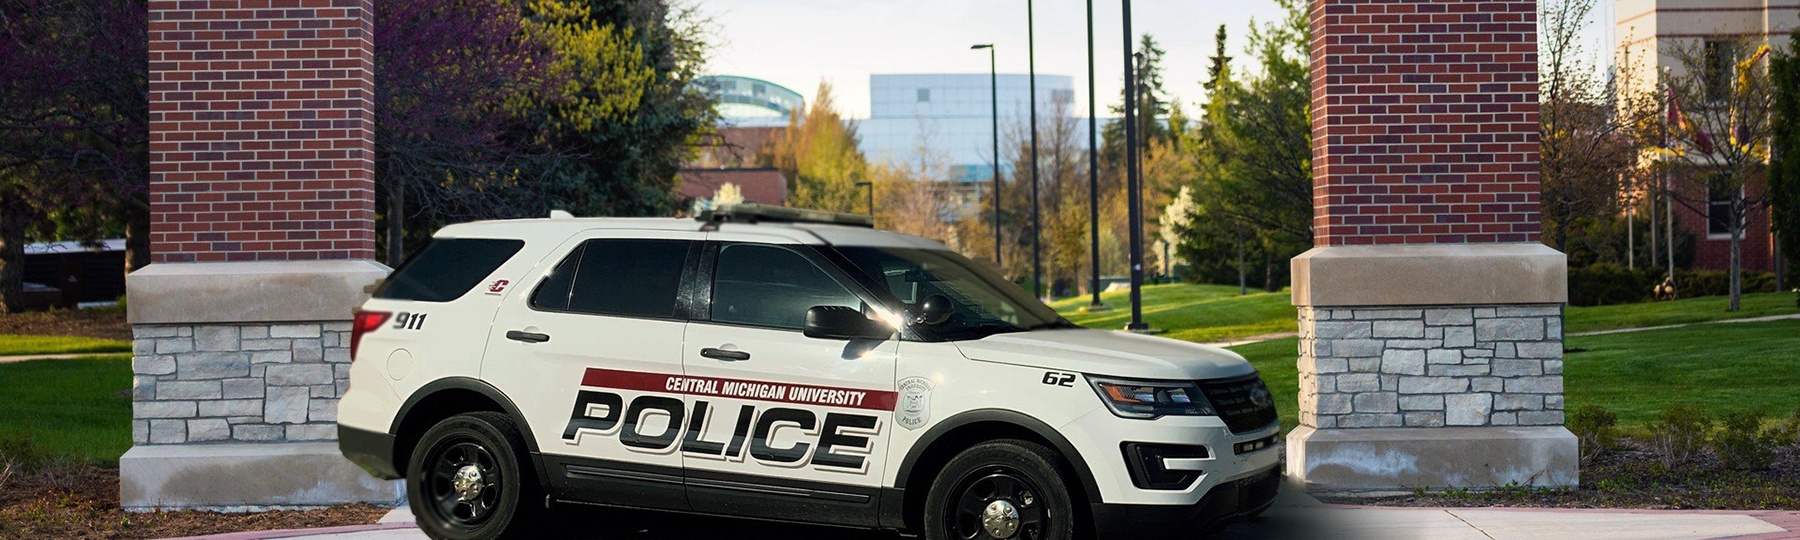 Central Michigan University Police vehicle under arches